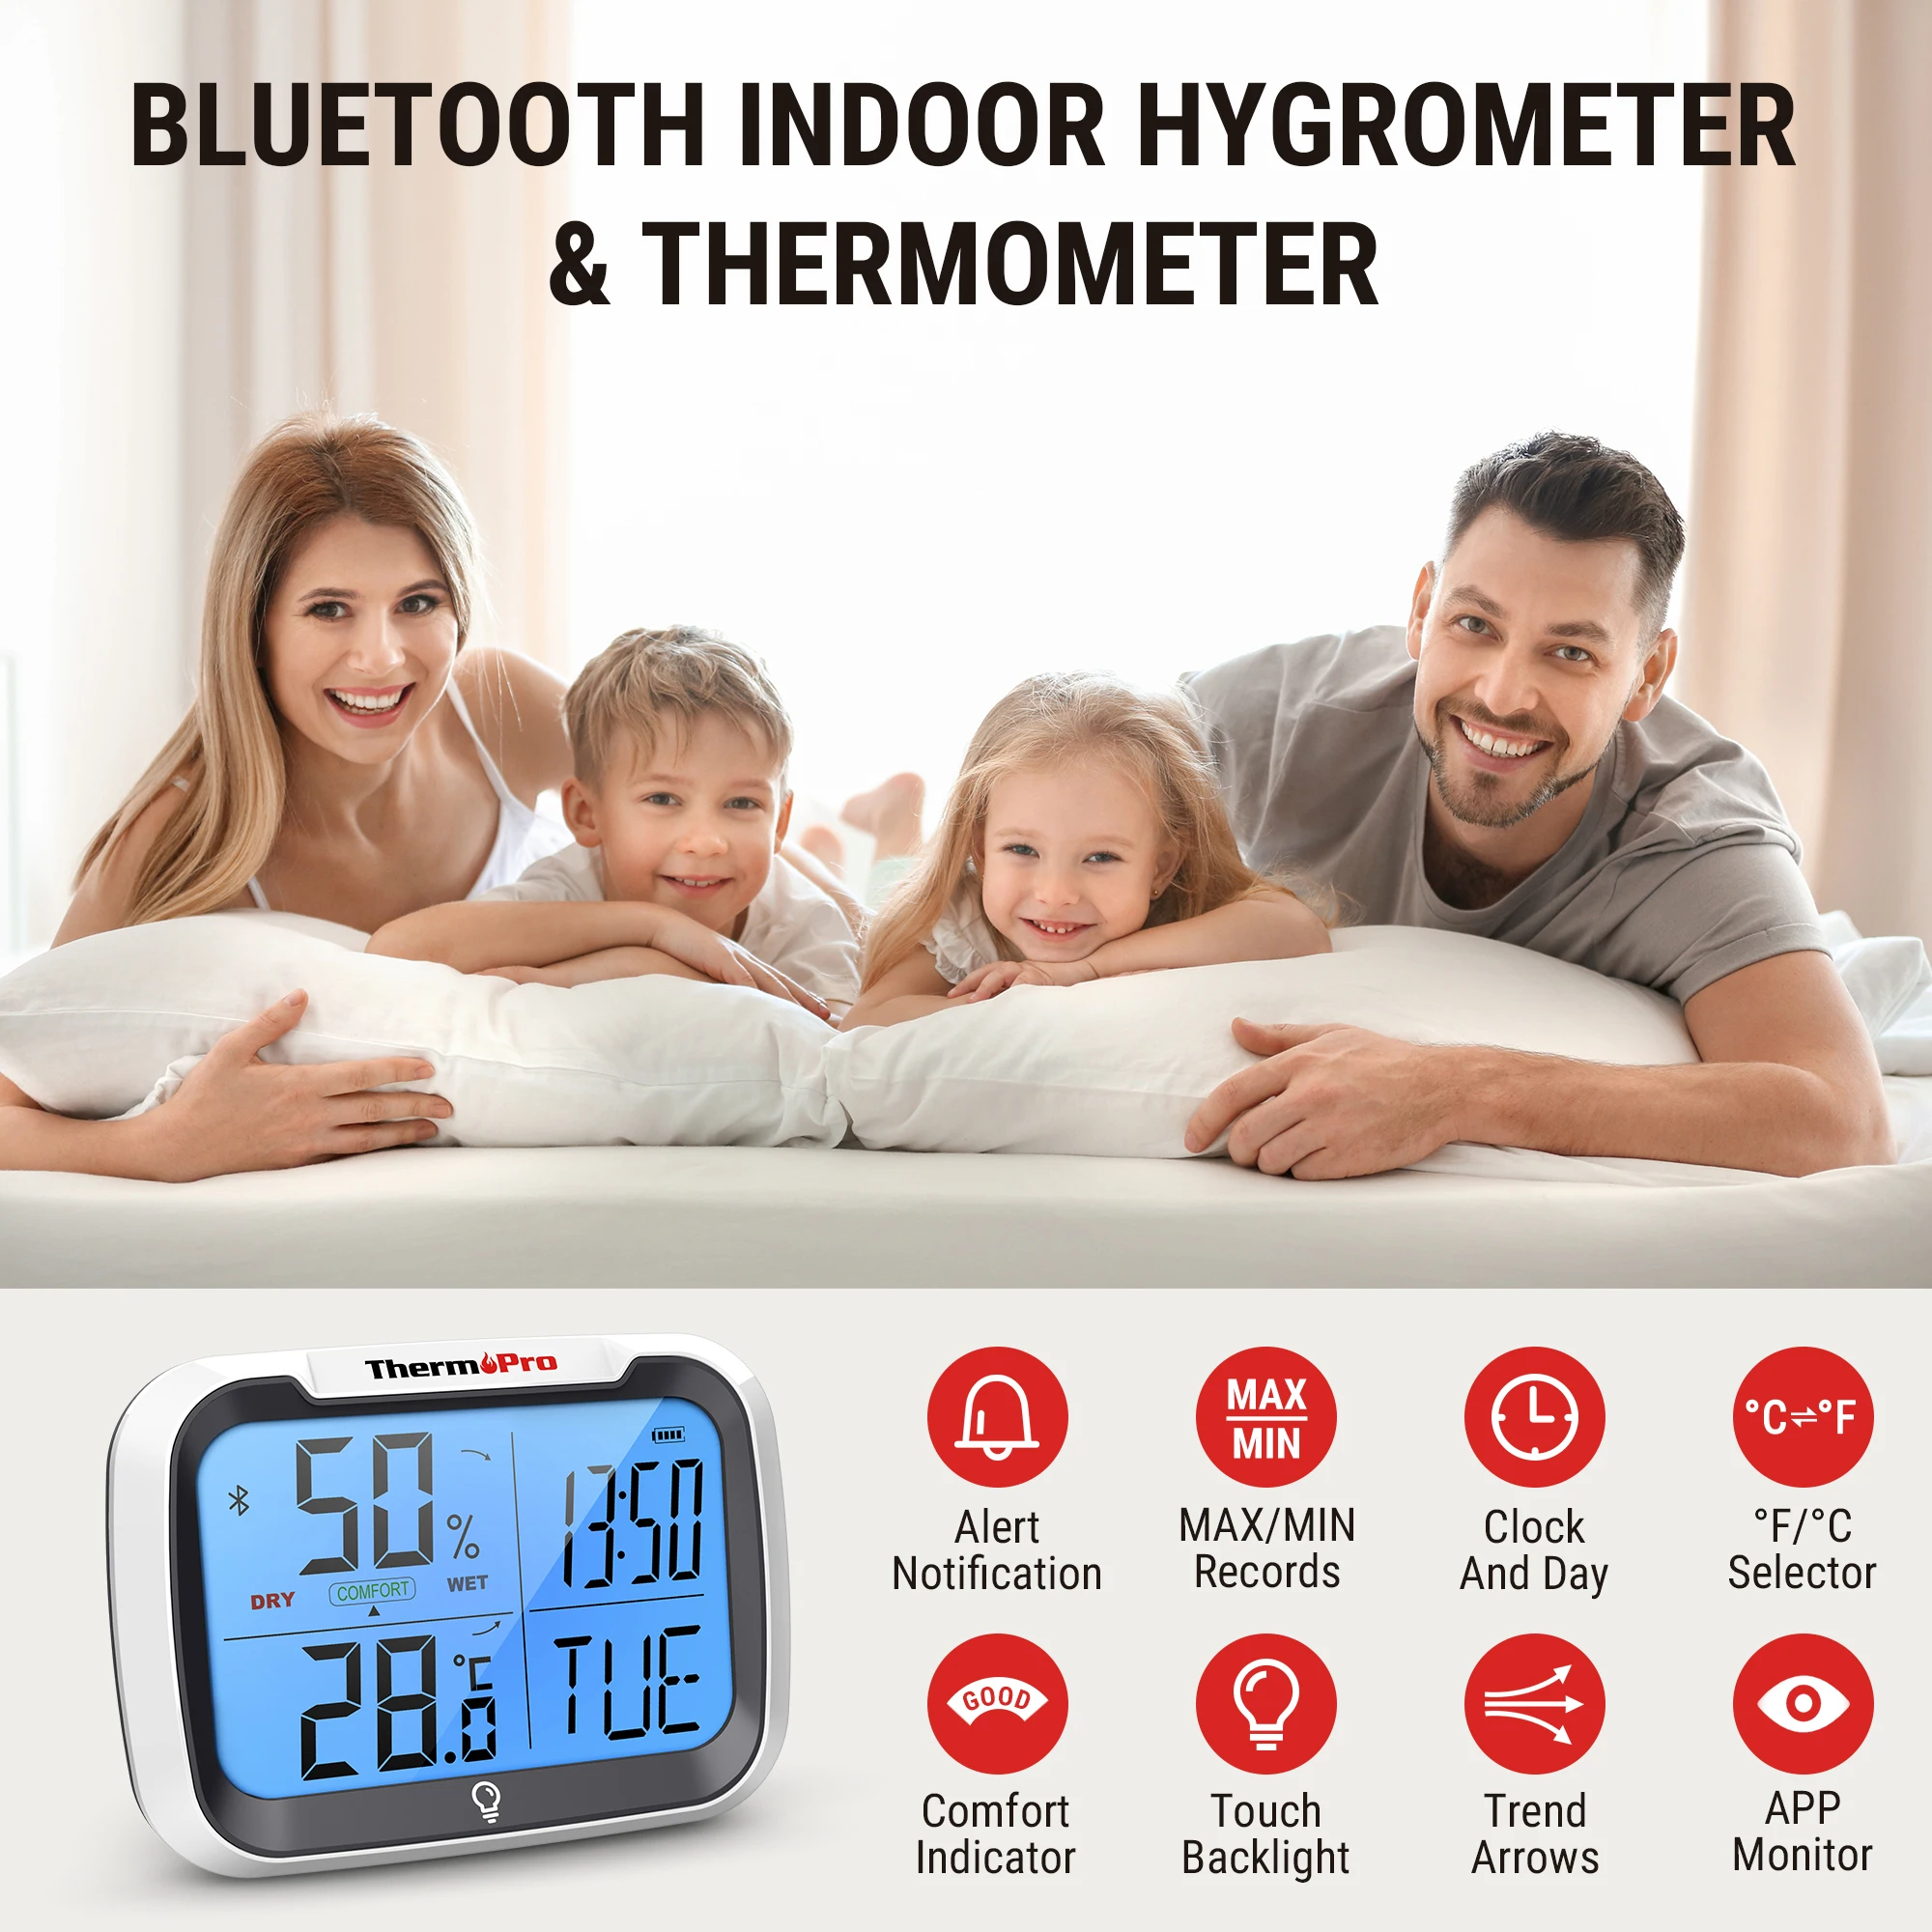 ThermoPro TP393 Hygrometer and Vice-Versa Cigars